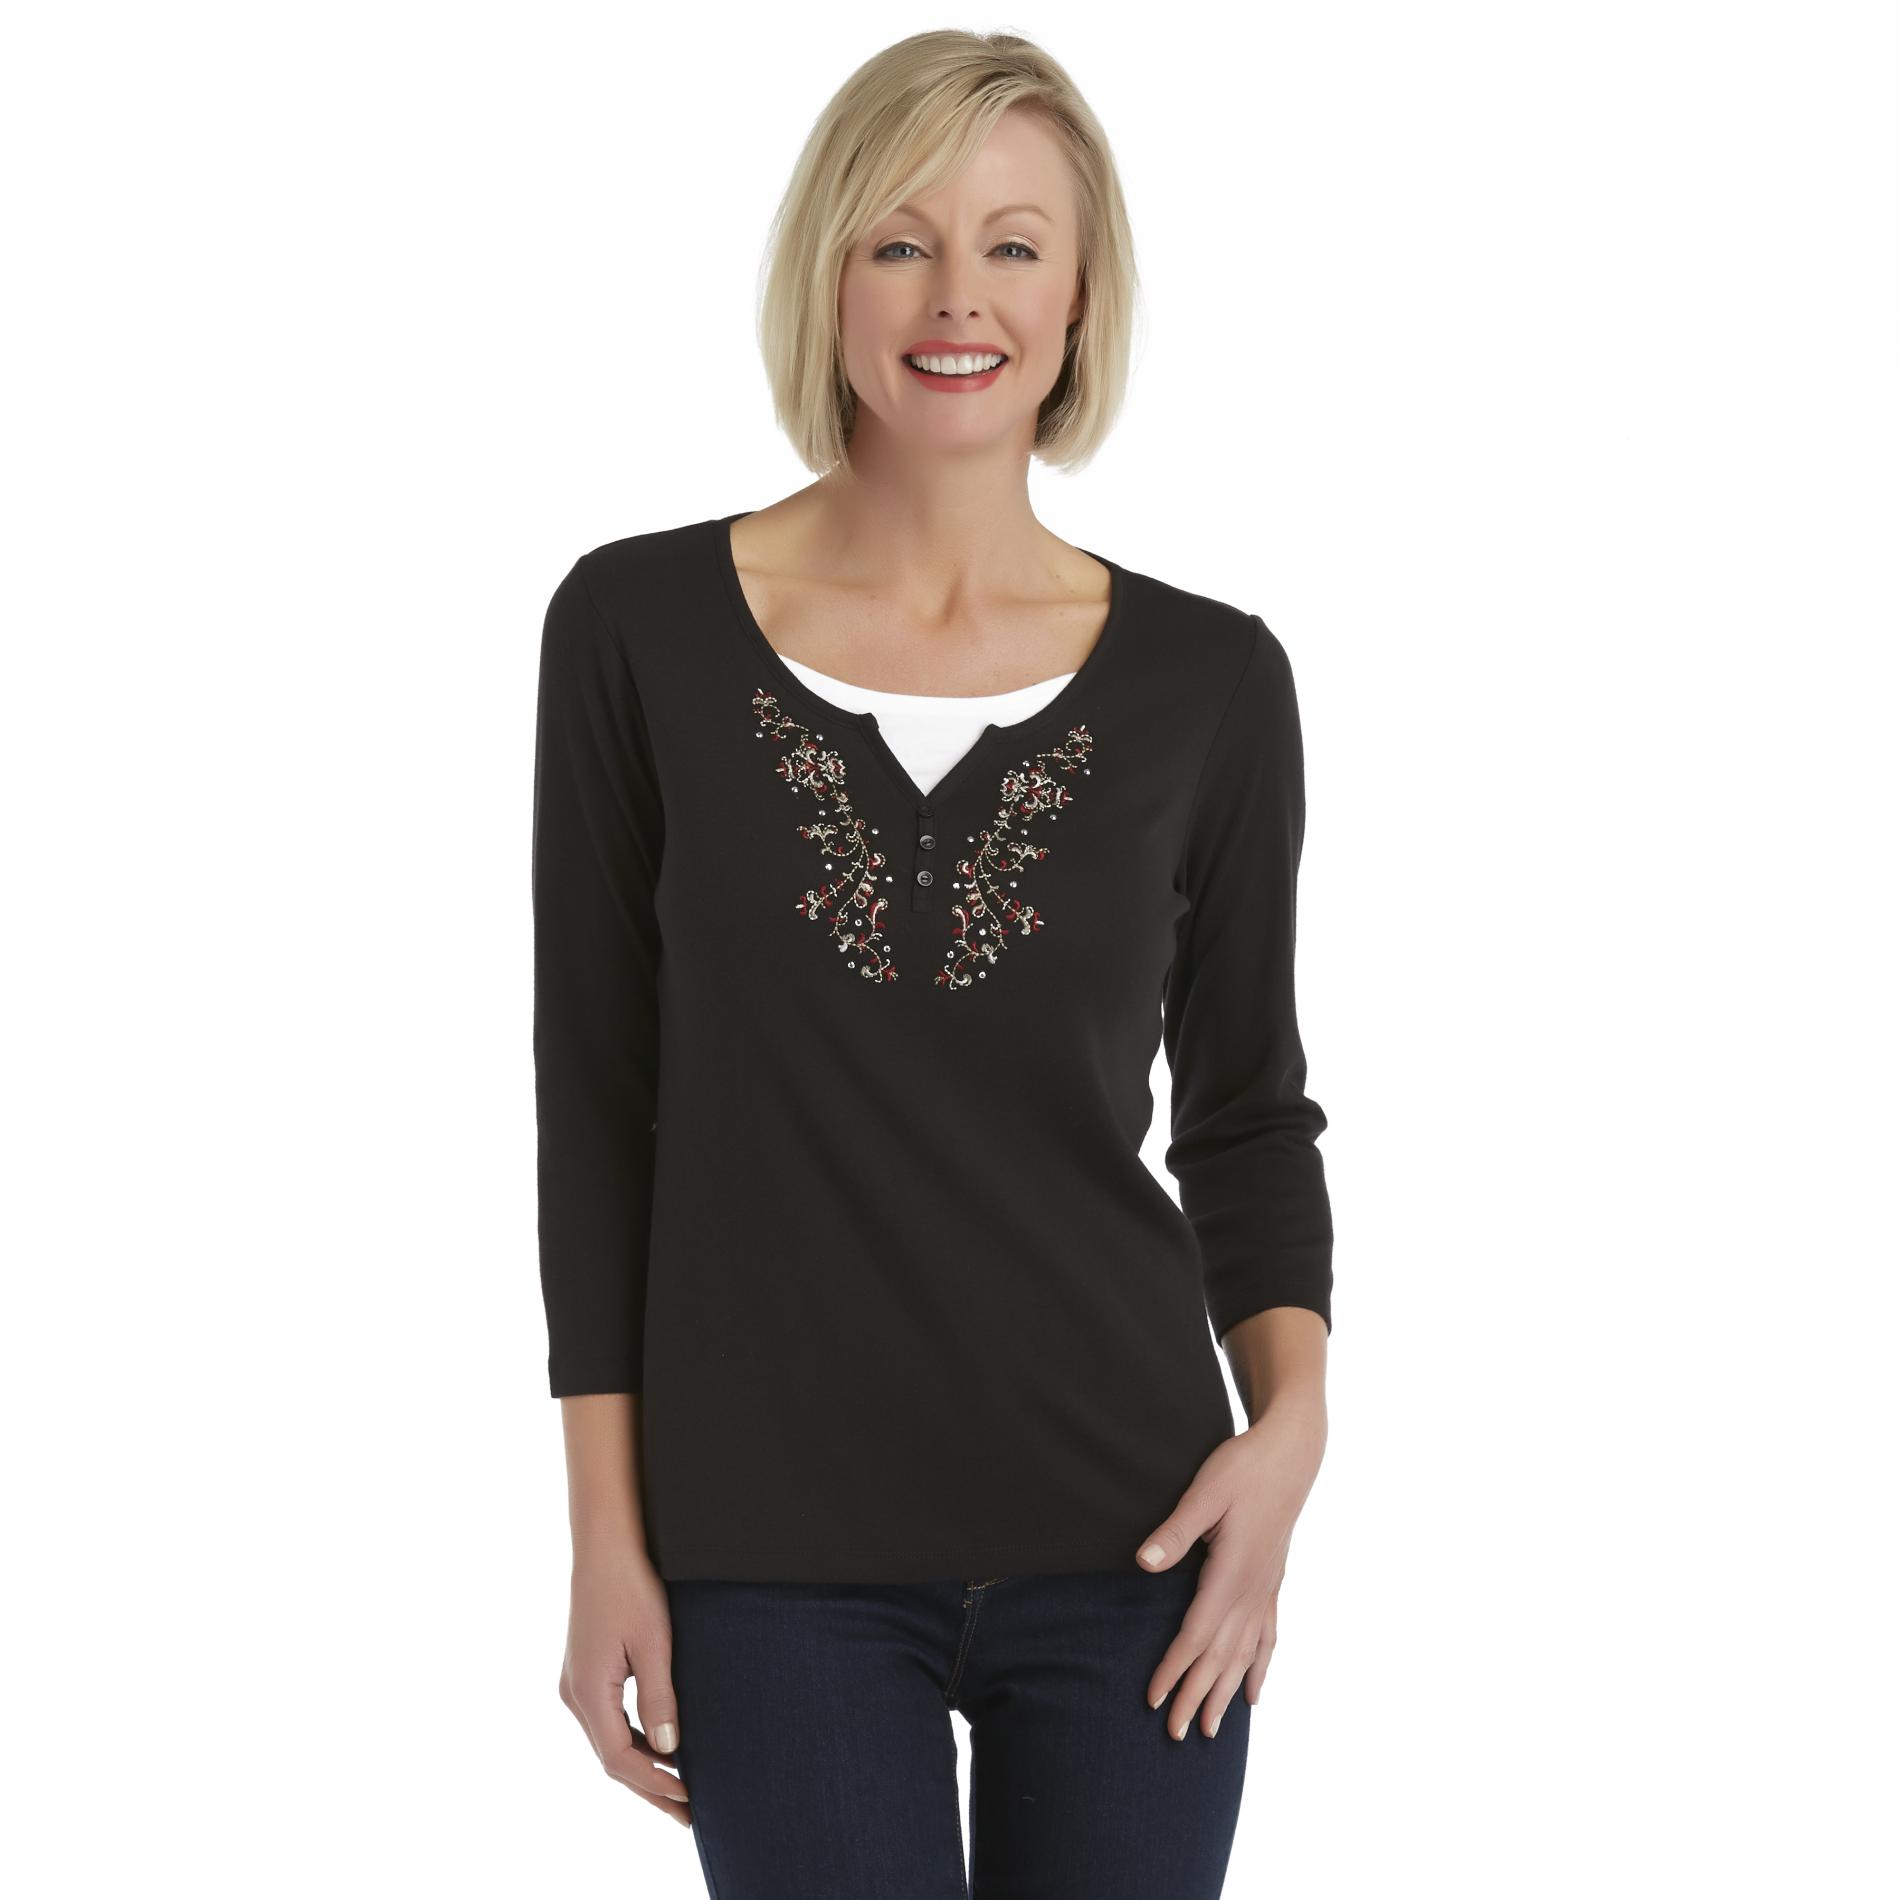 Basic Editions Women's Layered Look Knit Top - Filigree Embroidery